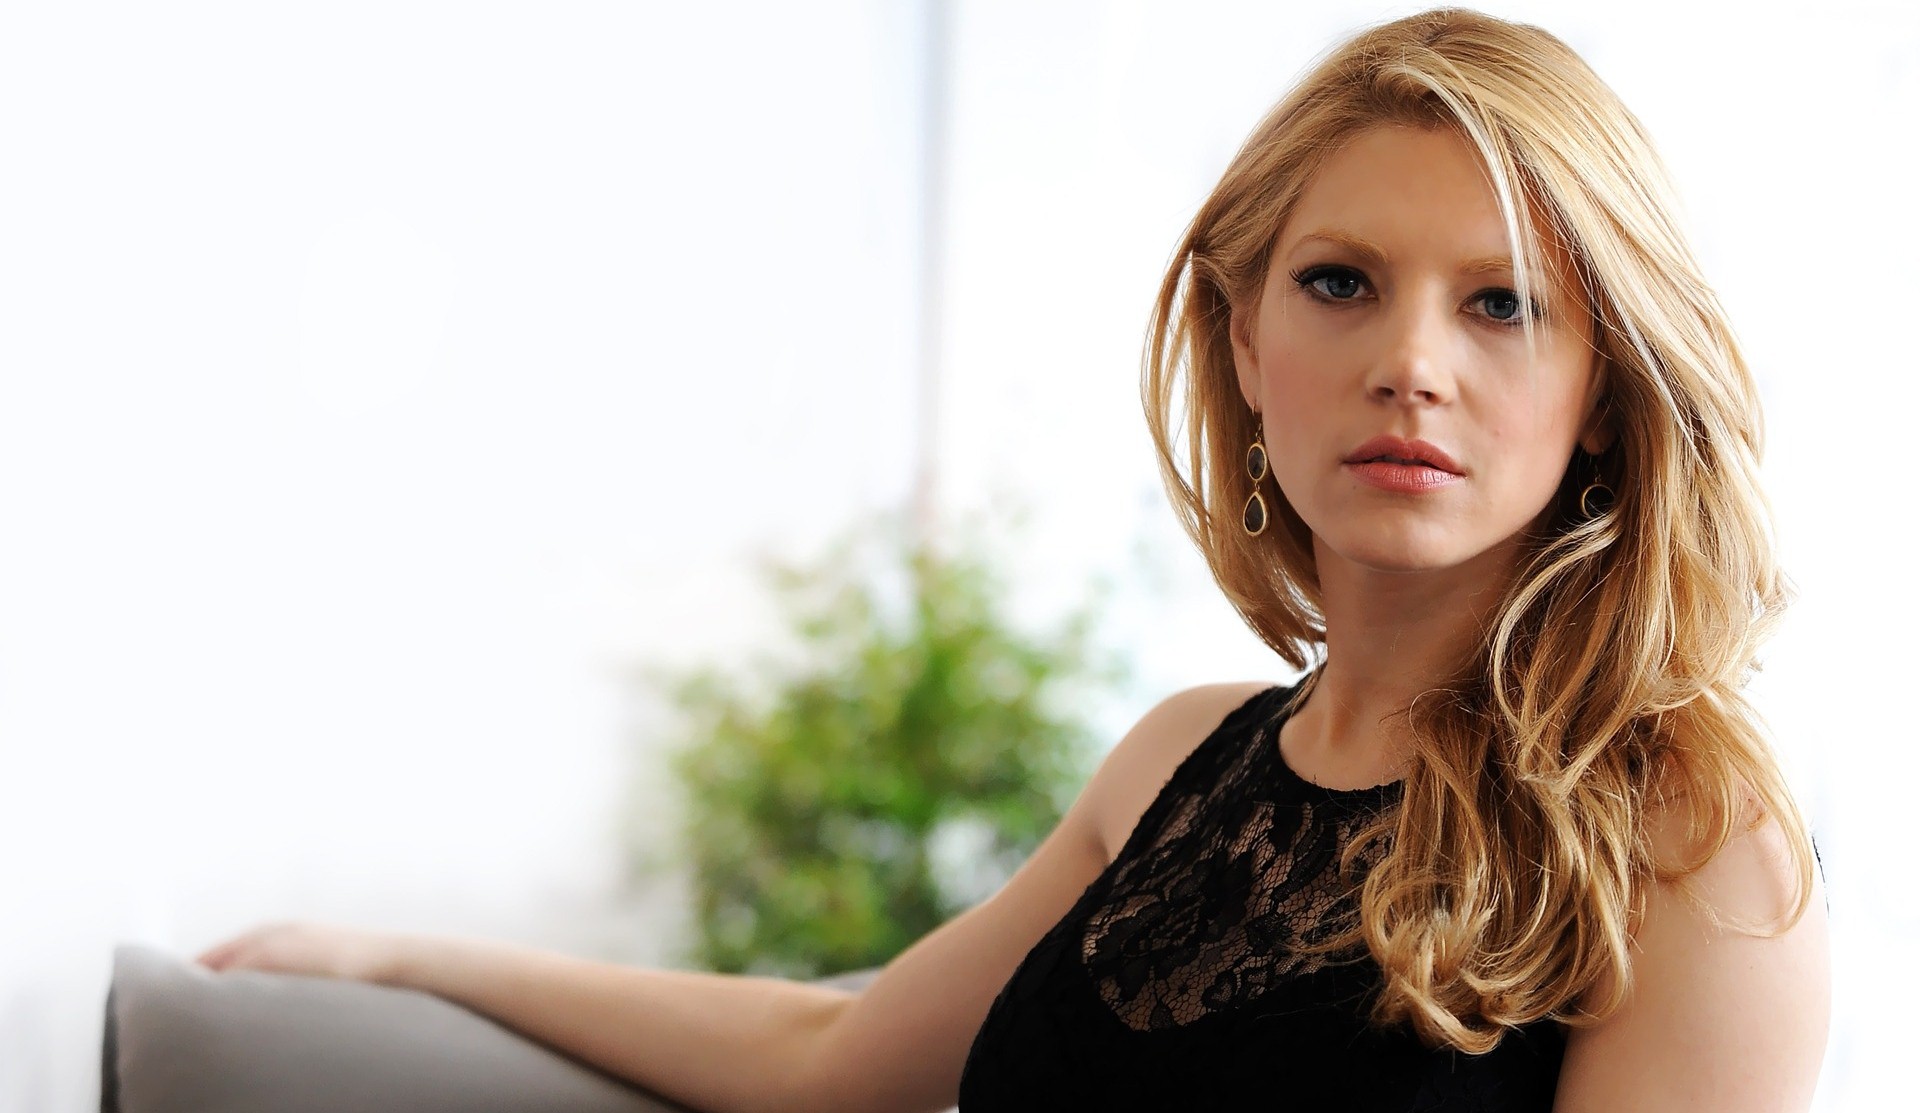 Katheryn Winnick Profile Biography Pictures News Hollywood